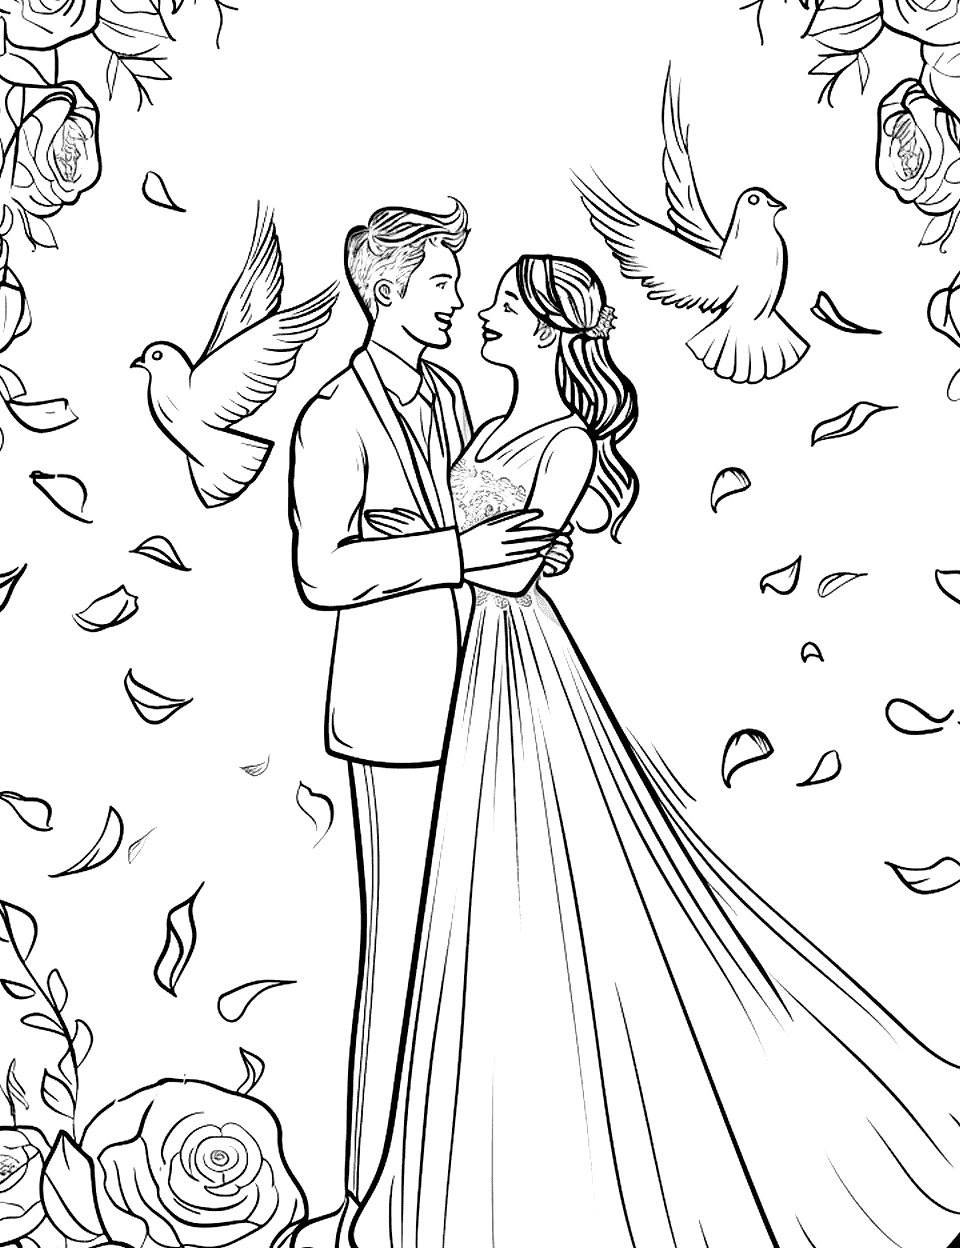 Dove Release Moment Wedding Coloring Page - A pair of doves flying away from a couple at their wedding.